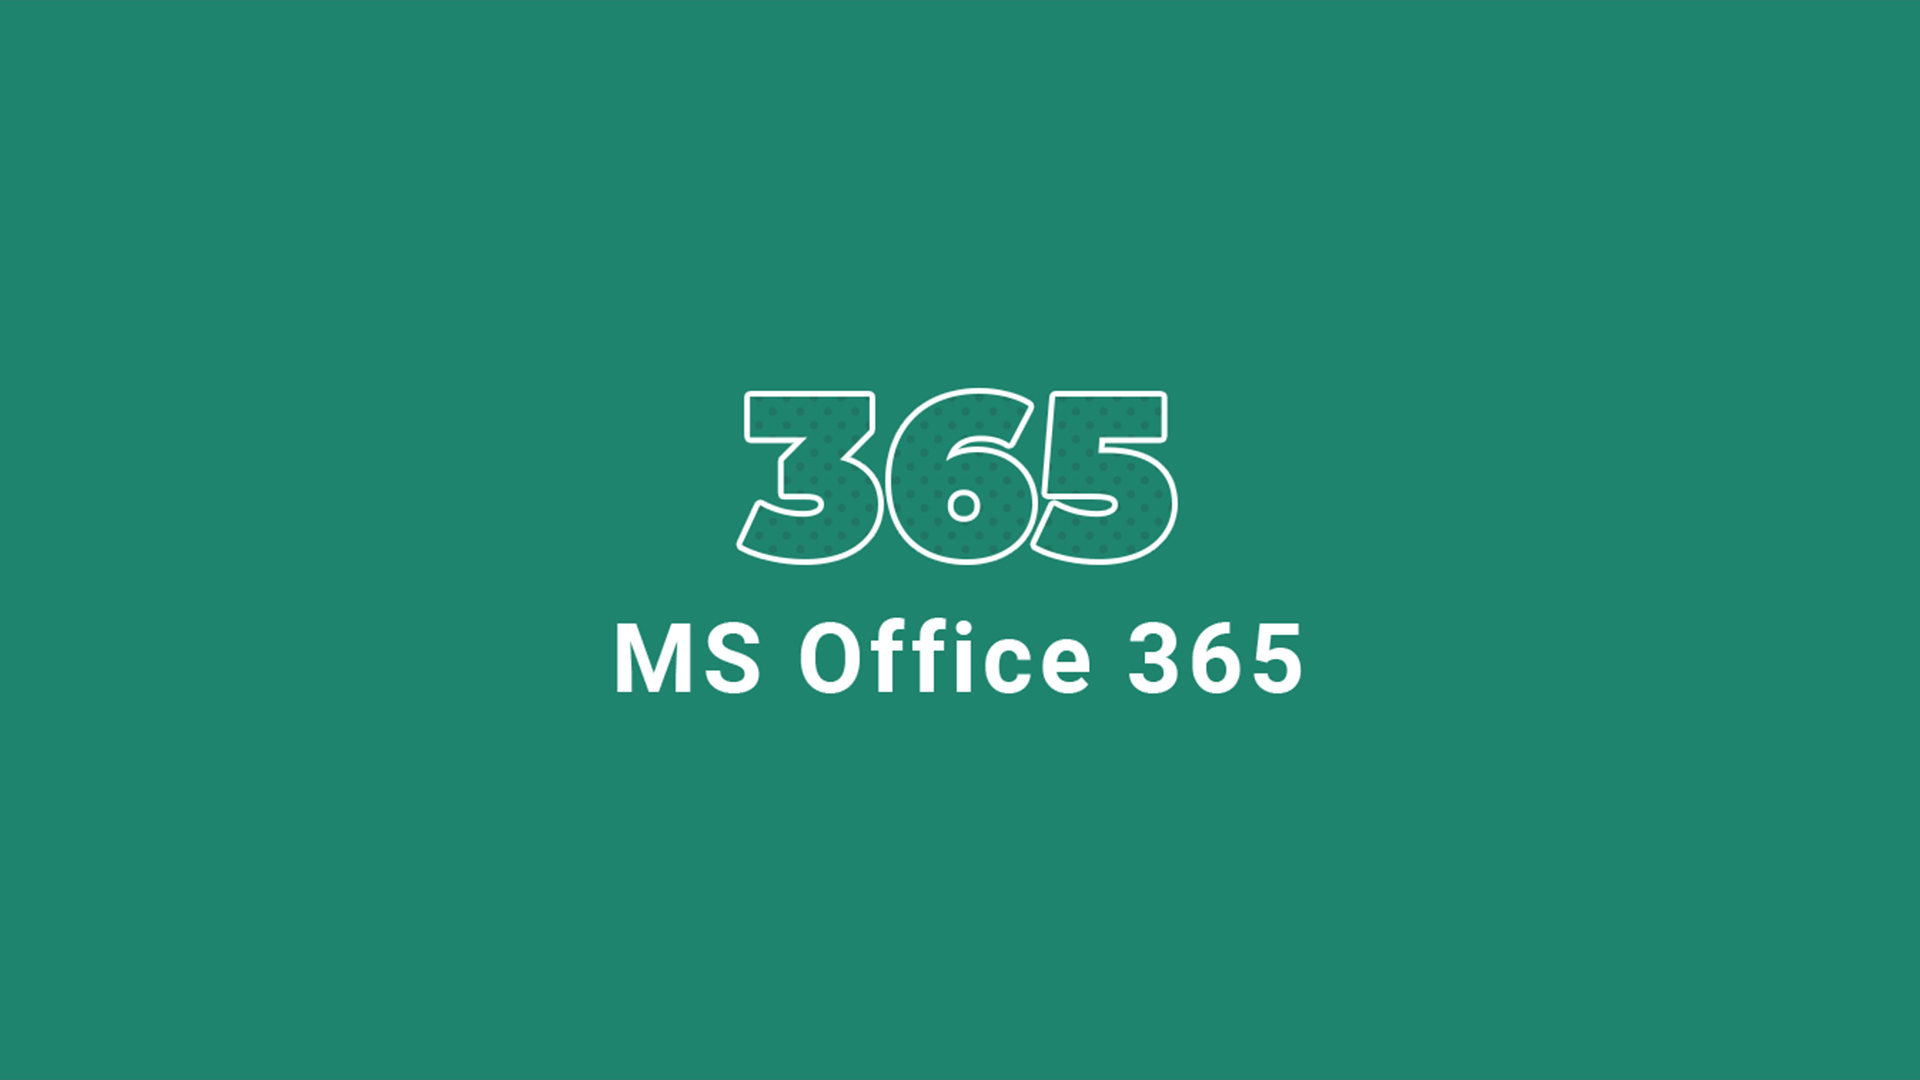 MS Office 365 Family Key (6 Months / 6 Devices) $56.49